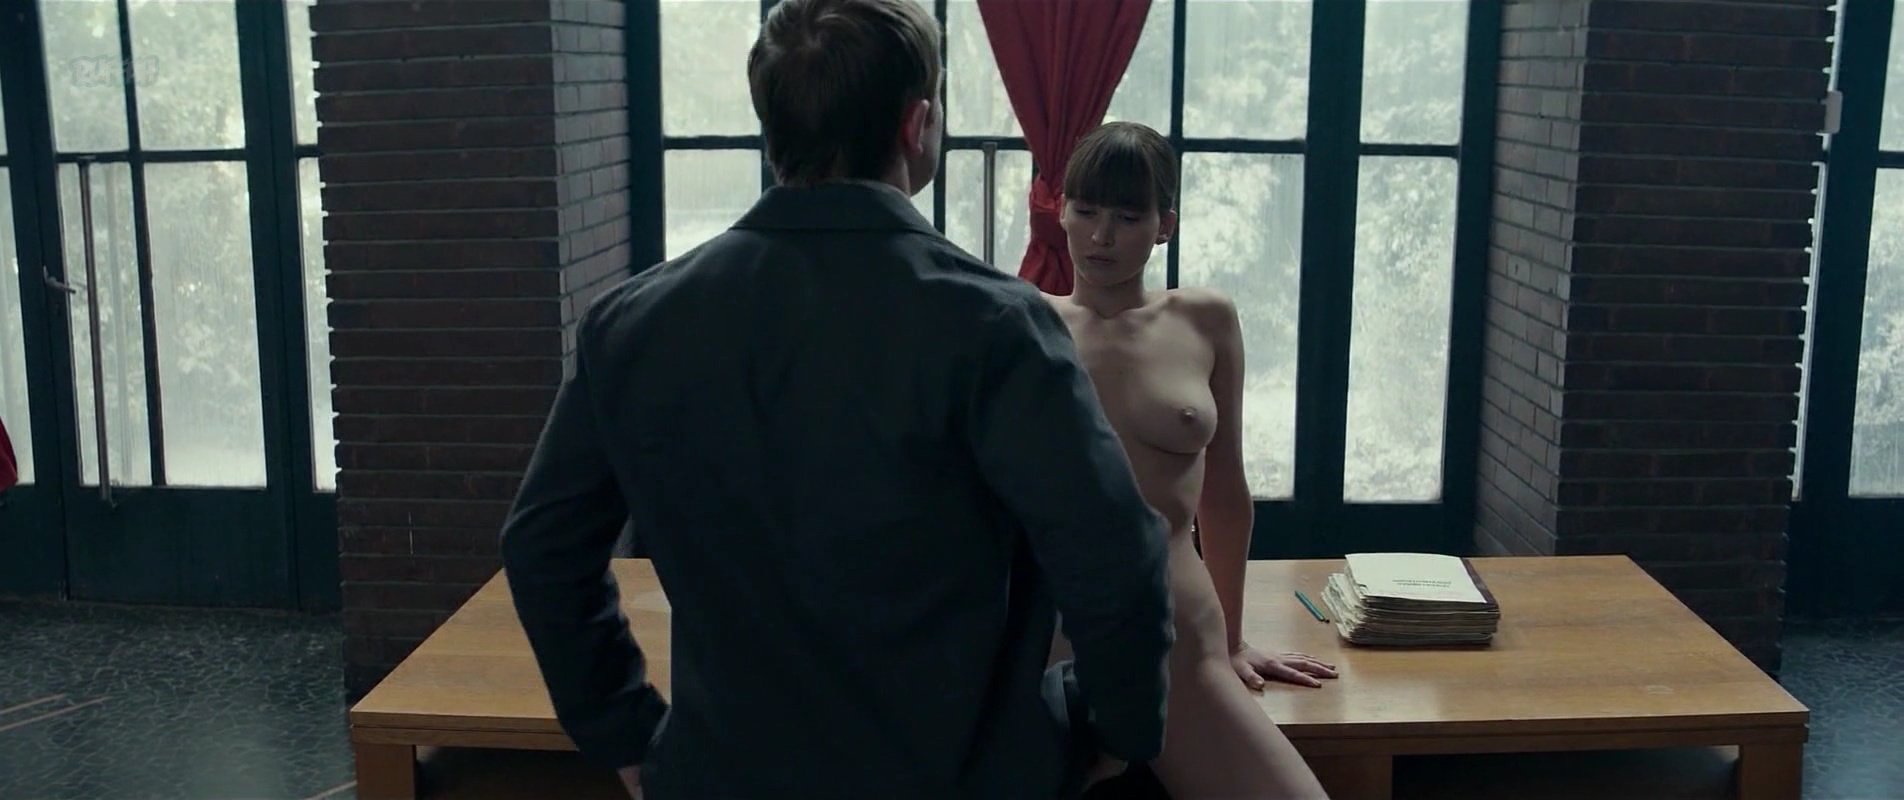 Red sparrow sex scenes on video